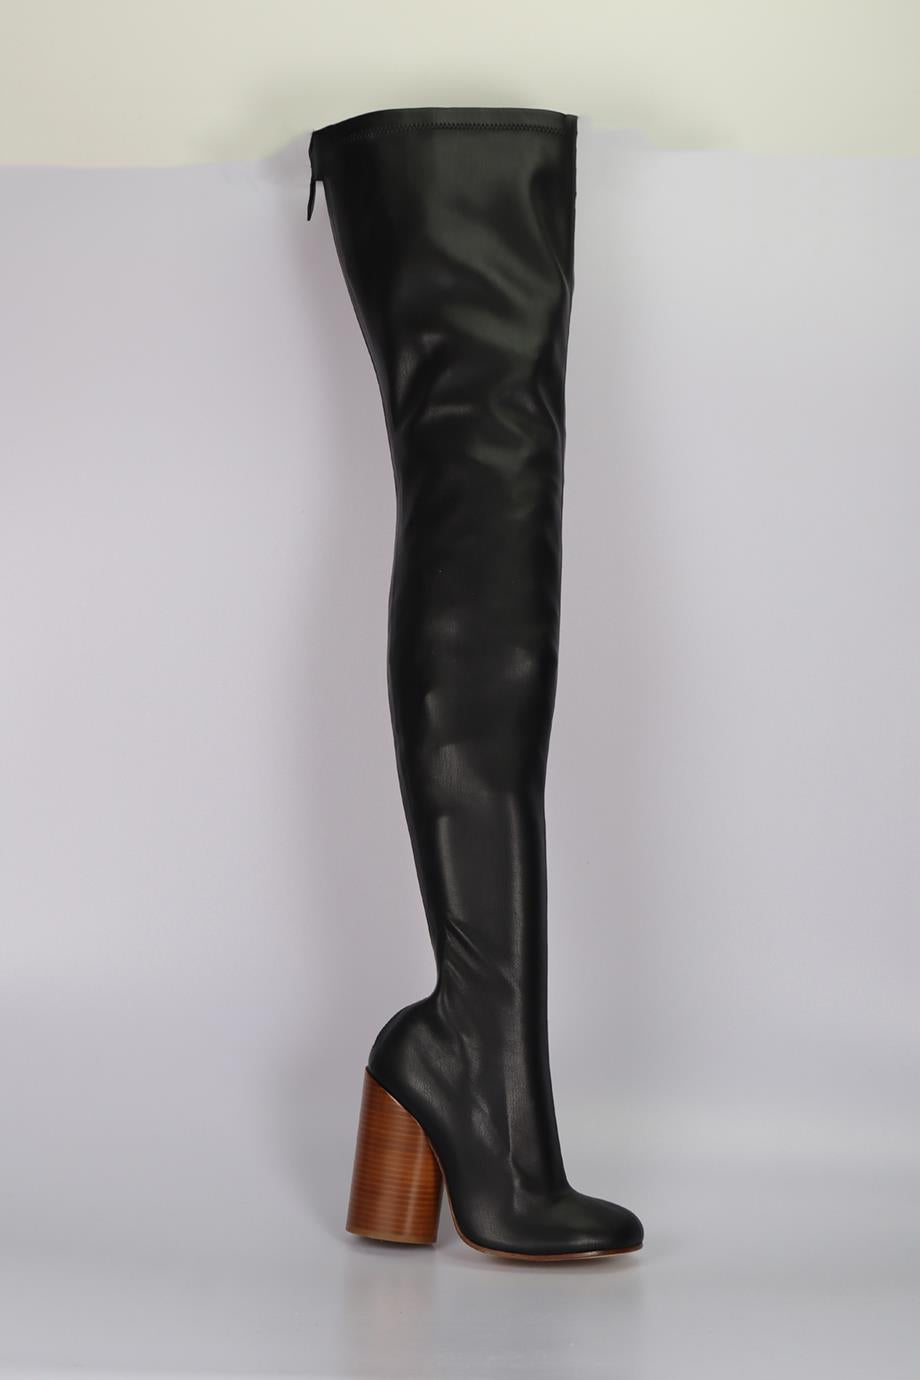 BURBERRY LEATHER OVER THE KNEE BOOTS EU 39 UK 6 US 9